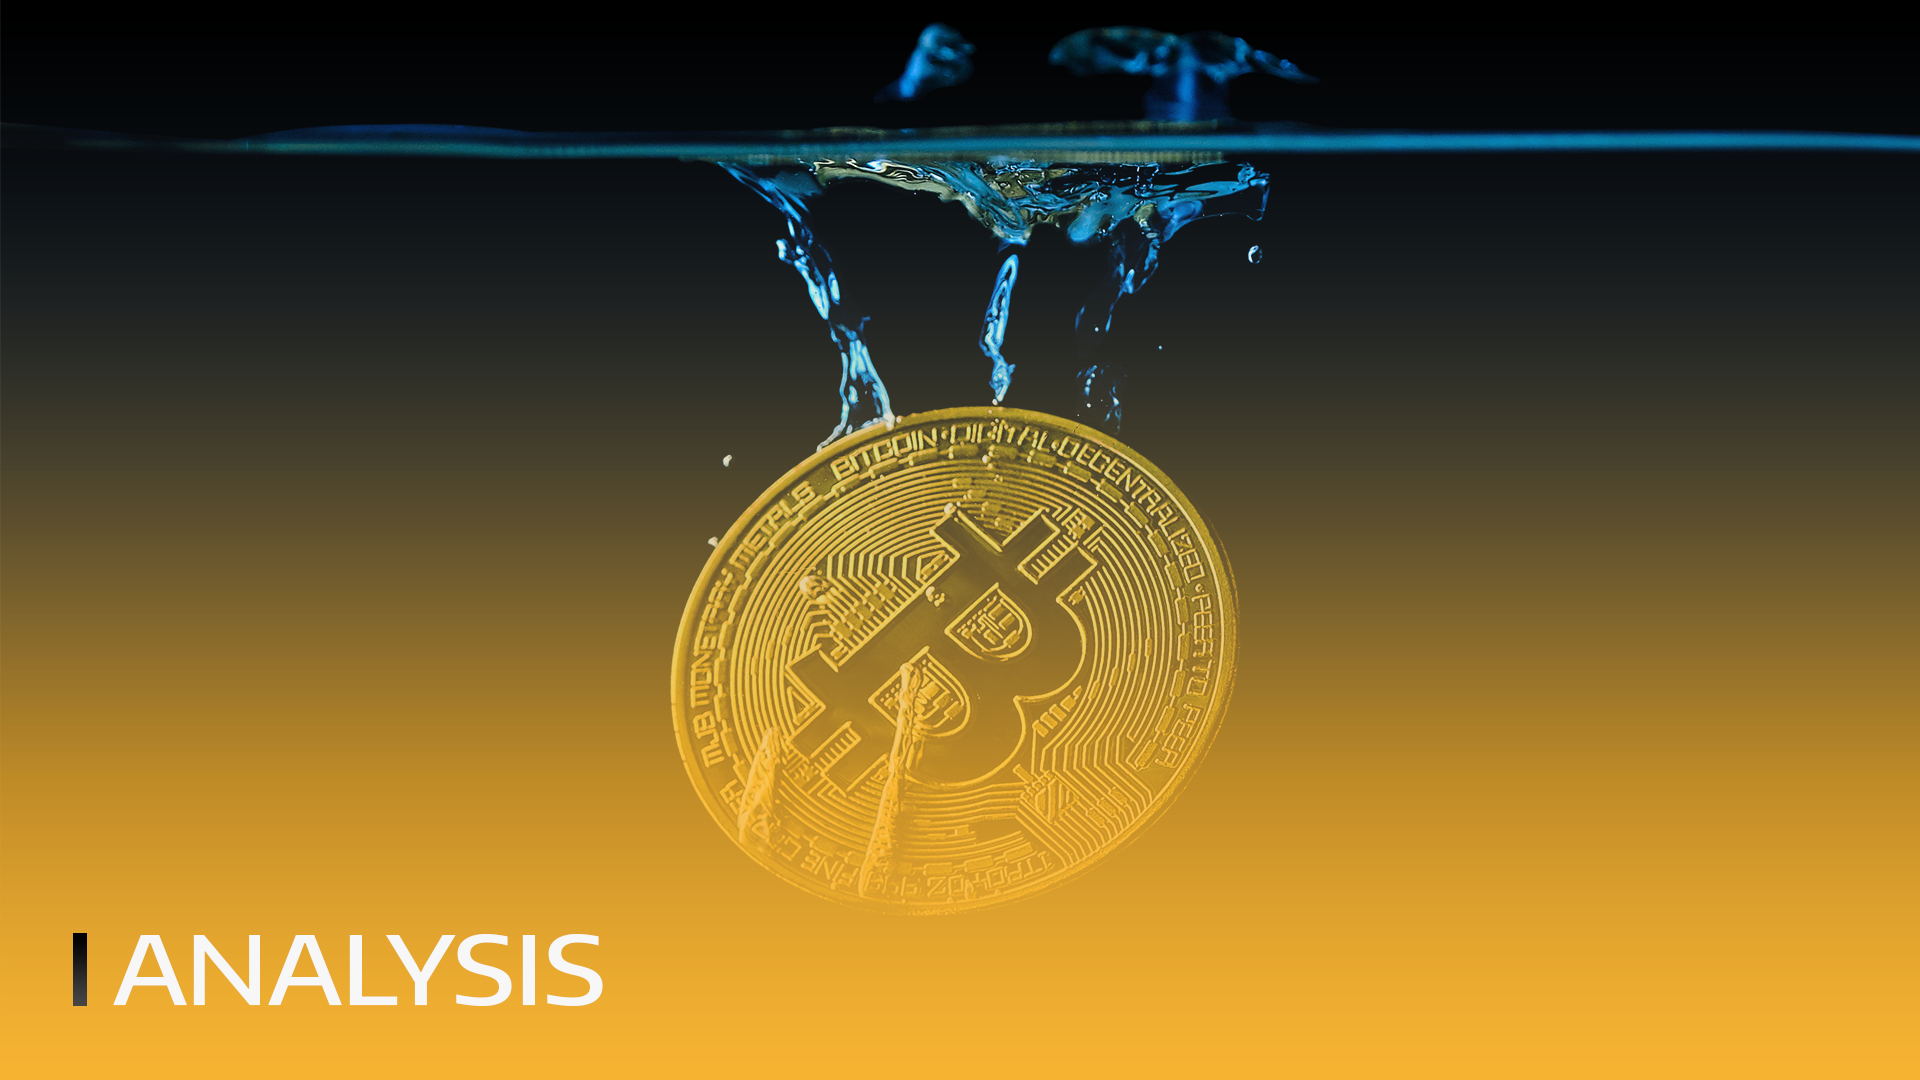 BITmarkets | Bitcoin Sinks After SEC Sues Binance – Time to Buy or Sell?